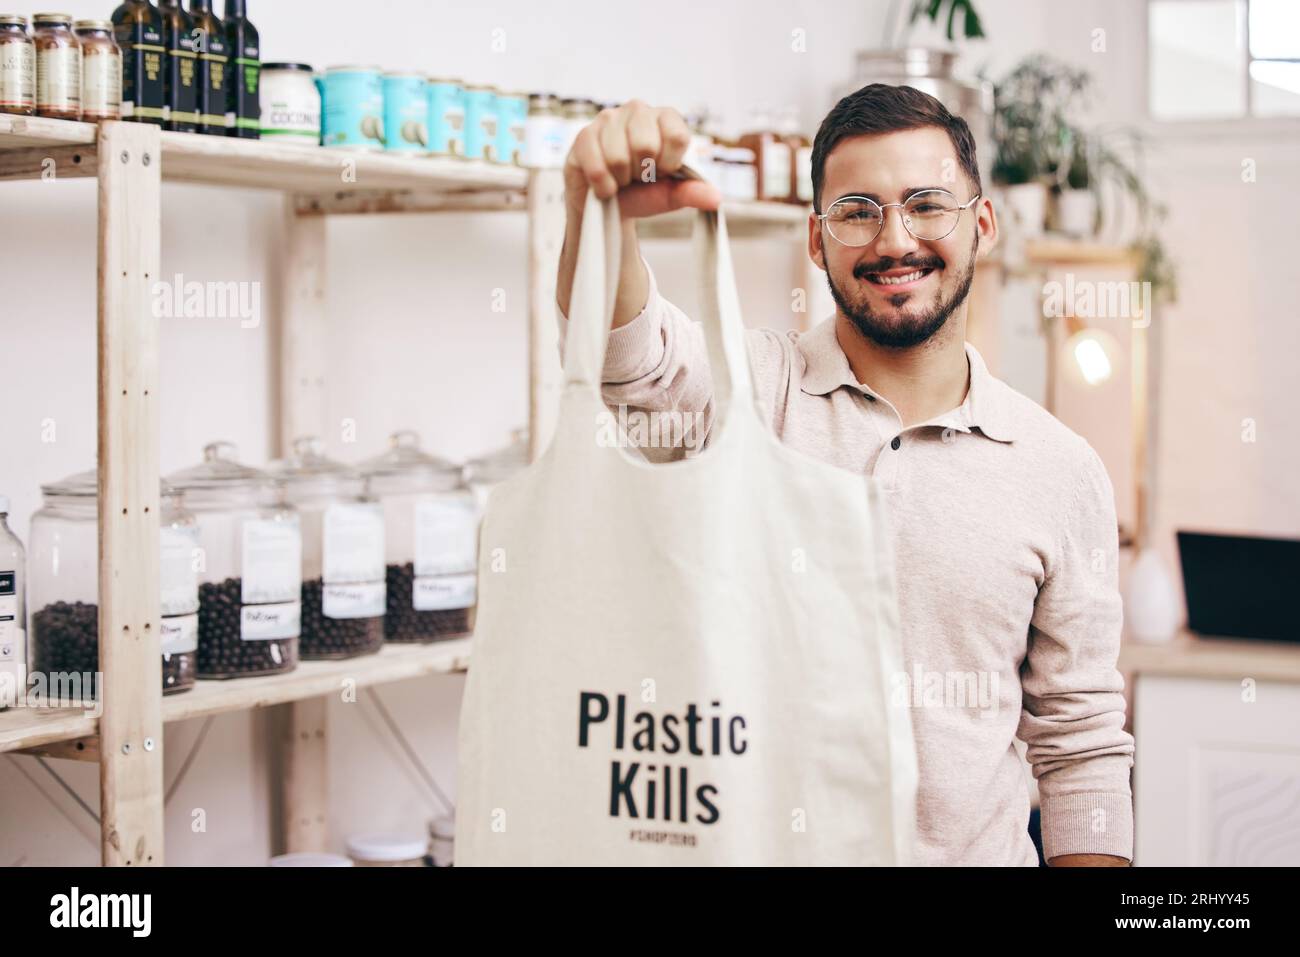 Man at eco friendly grocery store, recycling shopping bag and commitment to climate change at sustainable small business. Zero waste, plastic kills Stock Photo